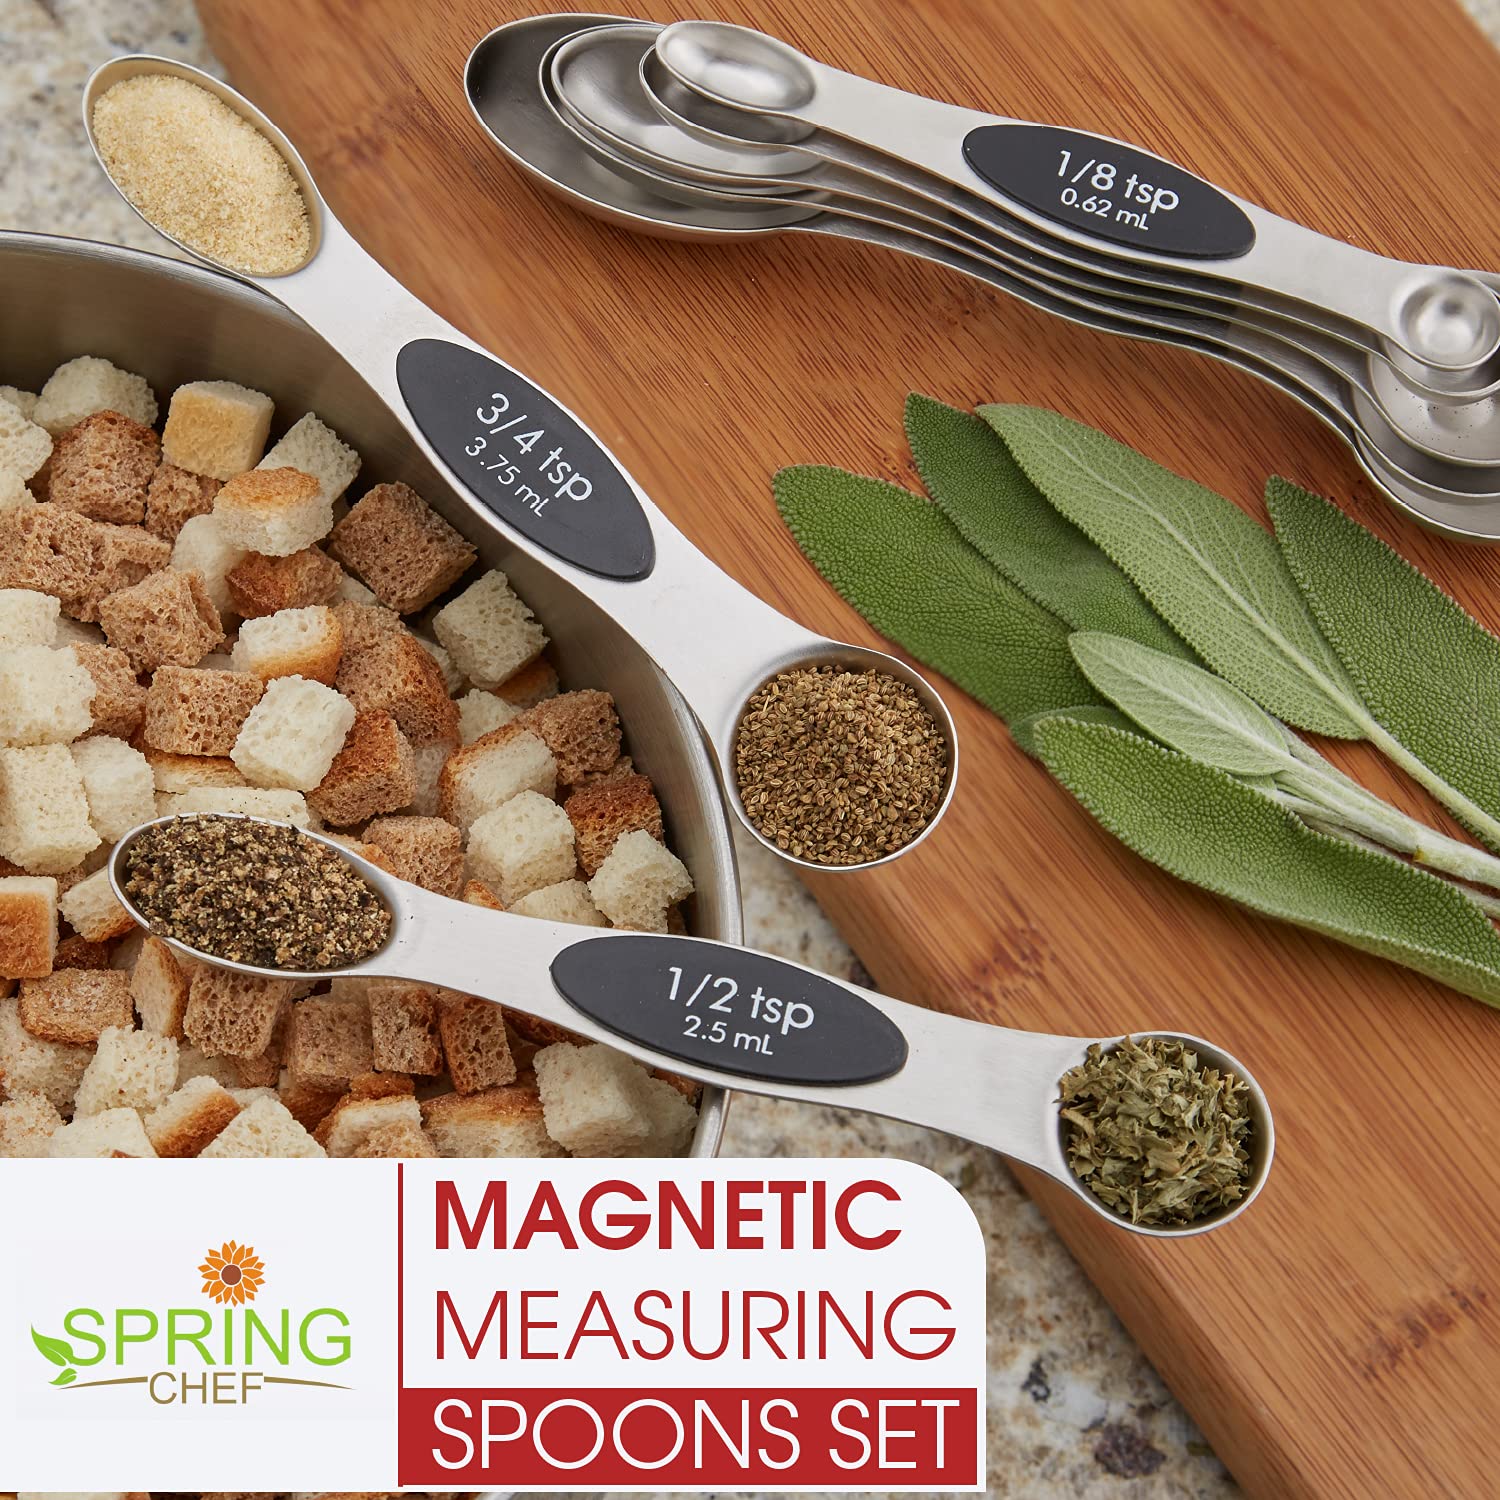 Spring Chef Magnetic Measuring Spoons Set with Strong N45 Magnets, Heavy Duty Stainless Steel Metal, Fits in Most Kitchen Spice Jars for Baking & Cooking, BPA Free, Black, Set of 8 with Leveler